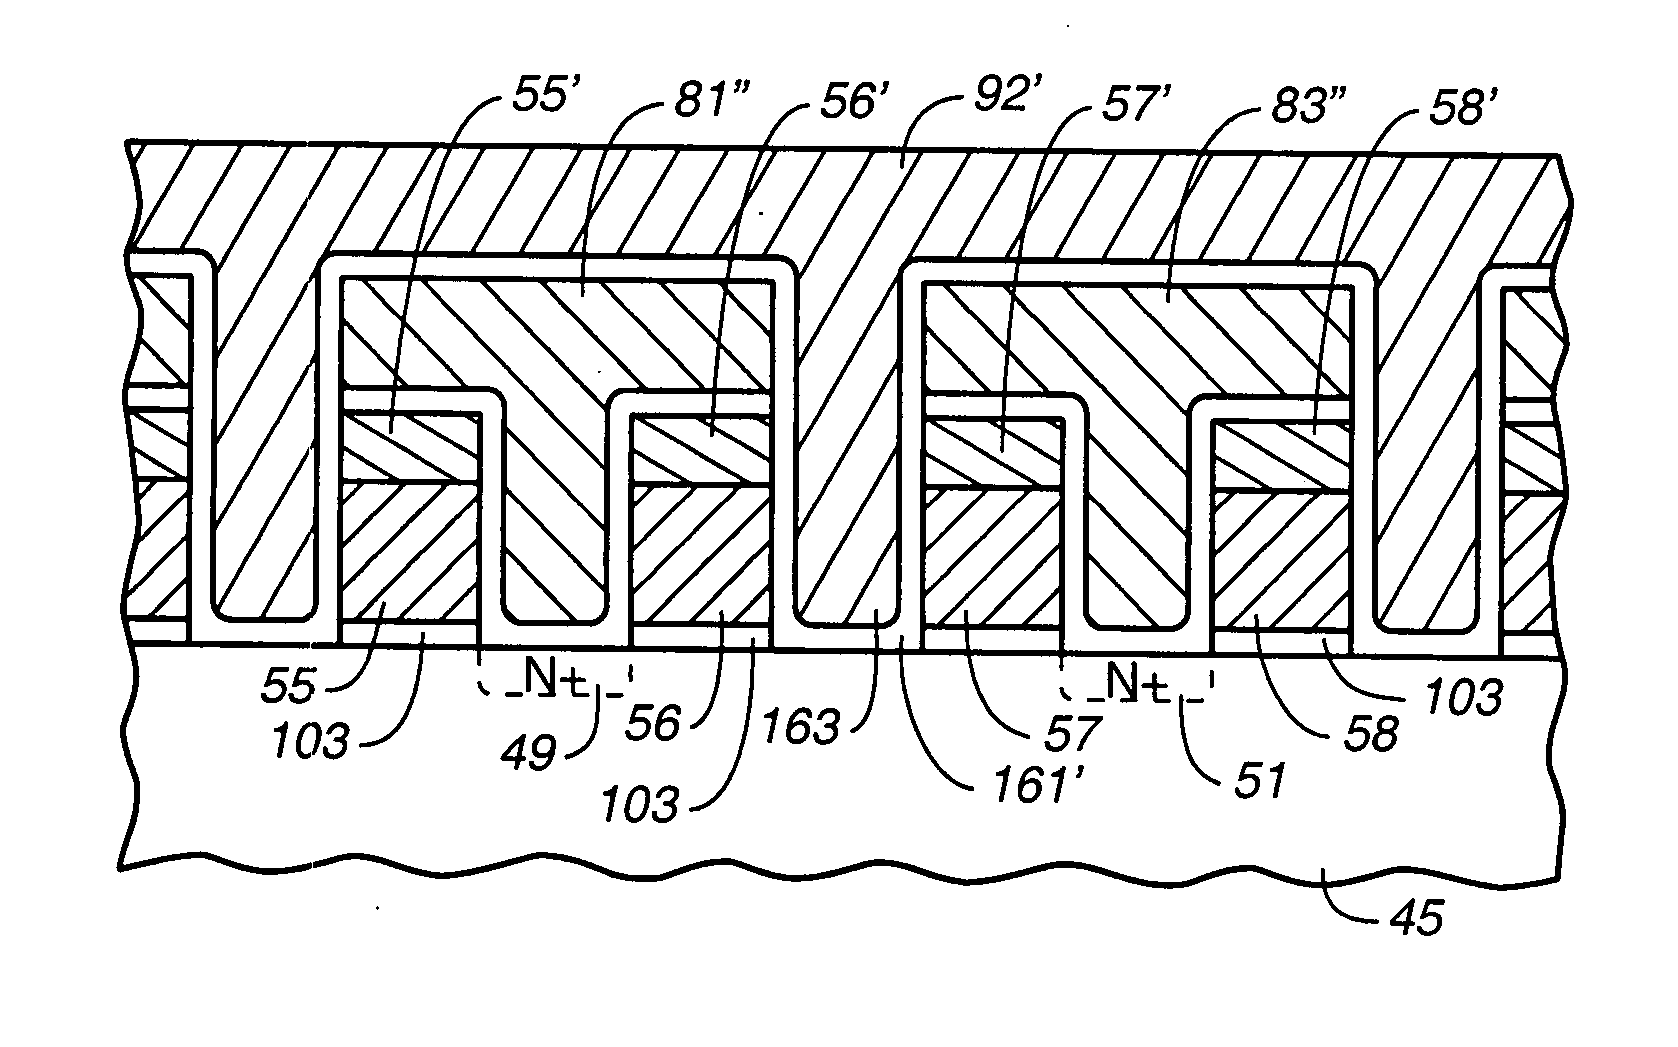 Scalable self-aligned dual floating gate memory cell array and methods of forming the array